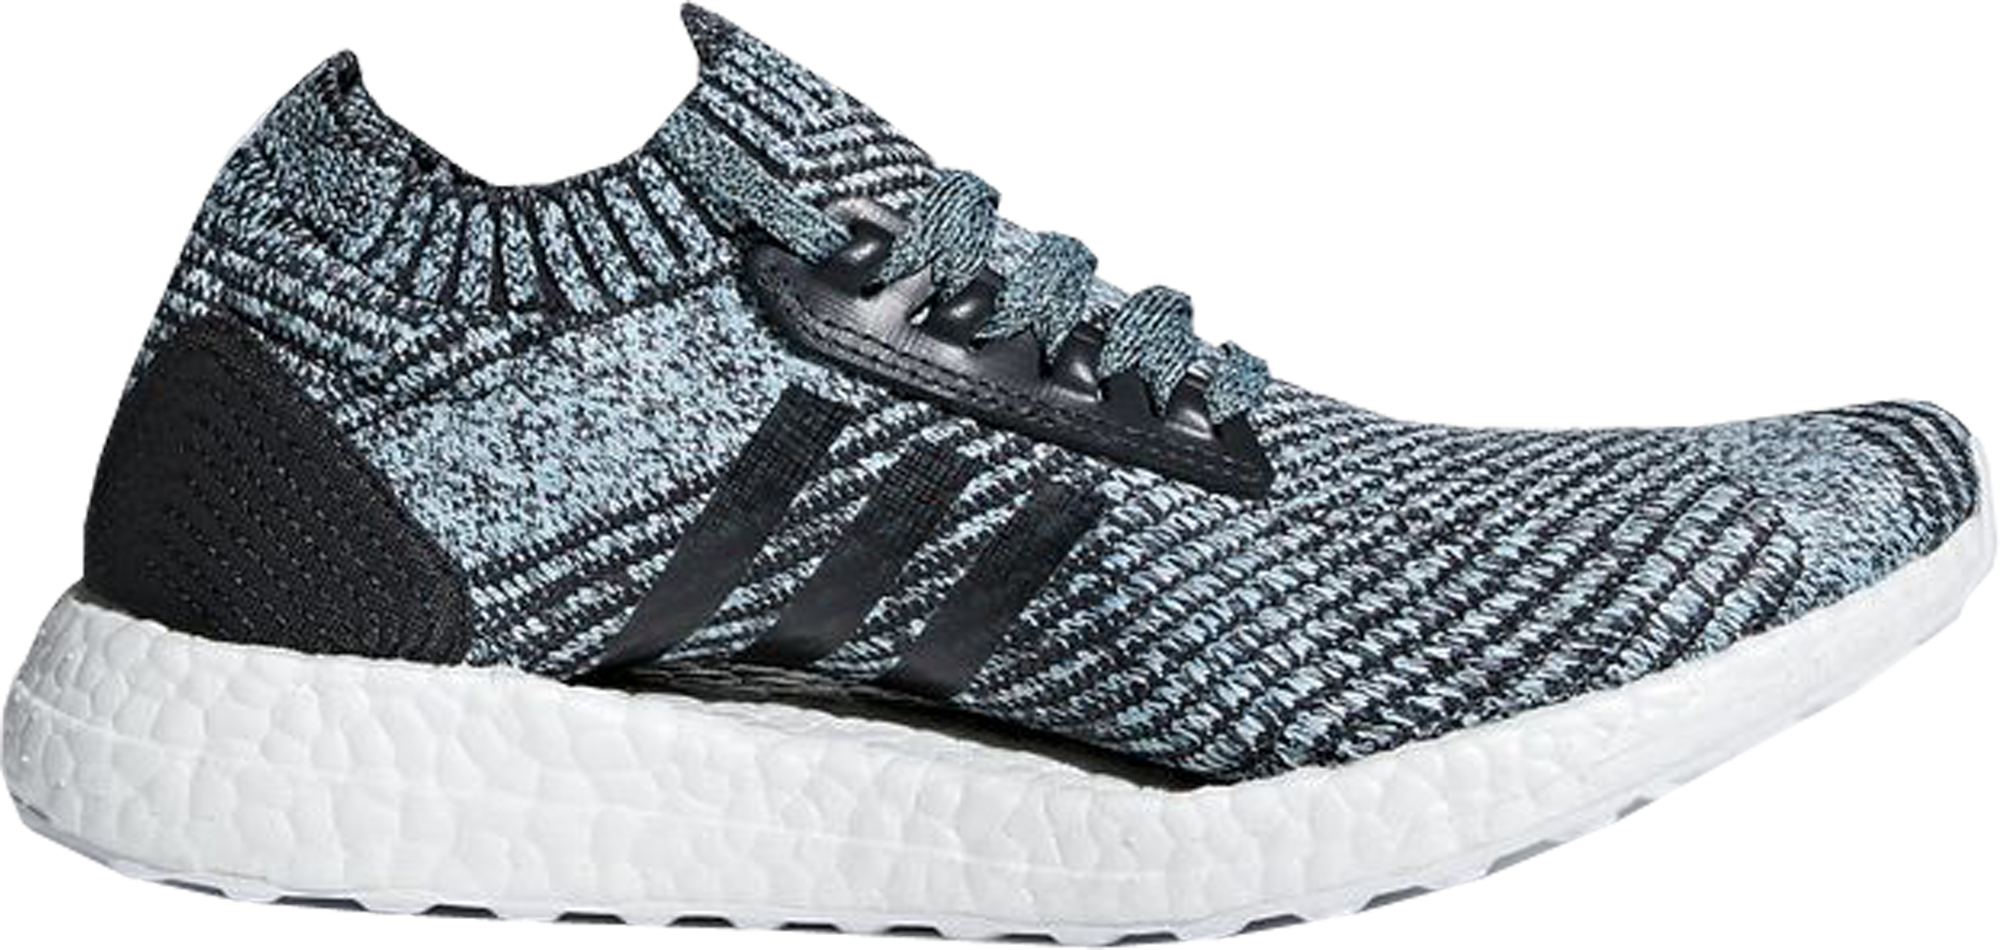 adidas ultra boost parley carbon